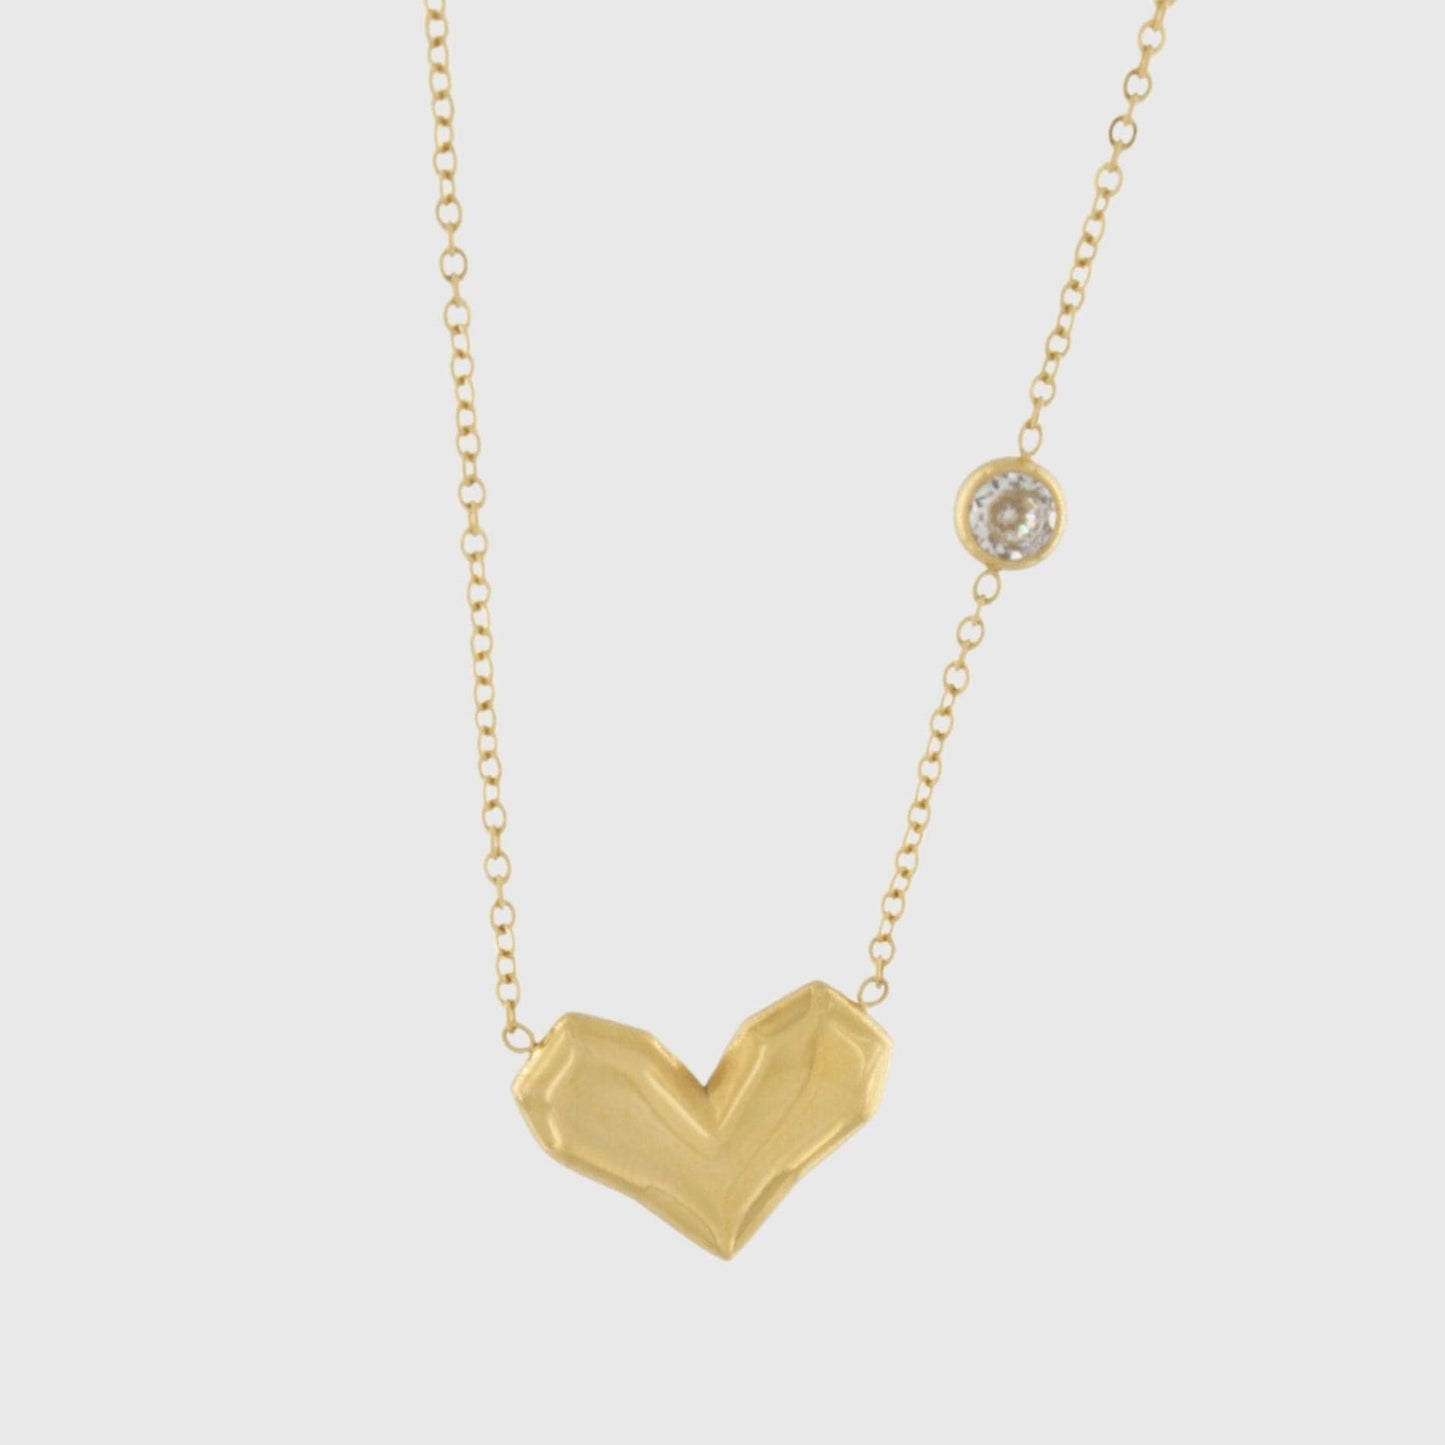 Love Waterproof Clear CZ & Heart Necklace 18K Gold Plating